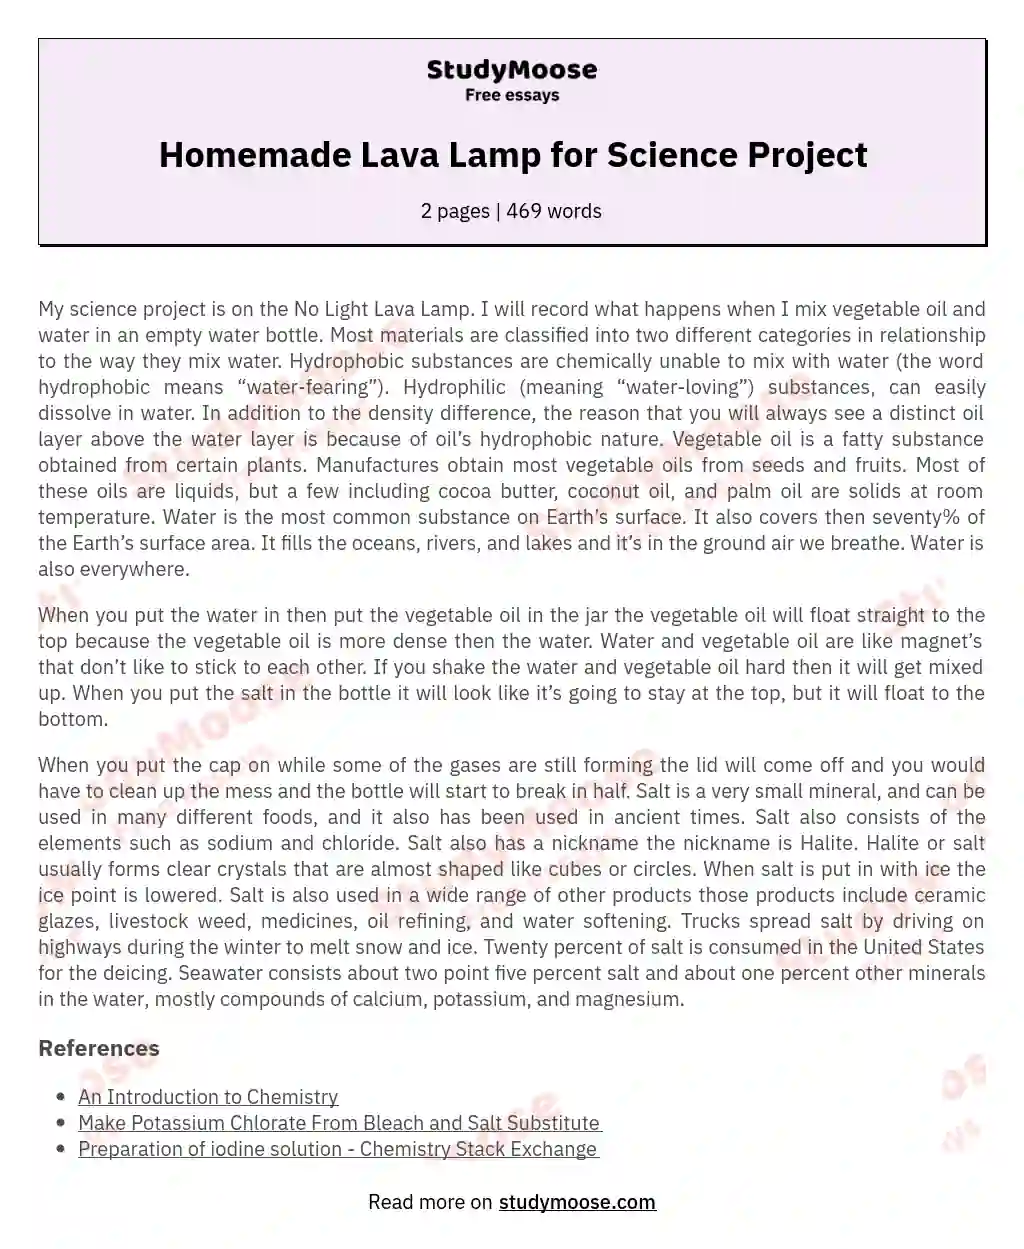 Homemade Lava Lamp for Science Project essay